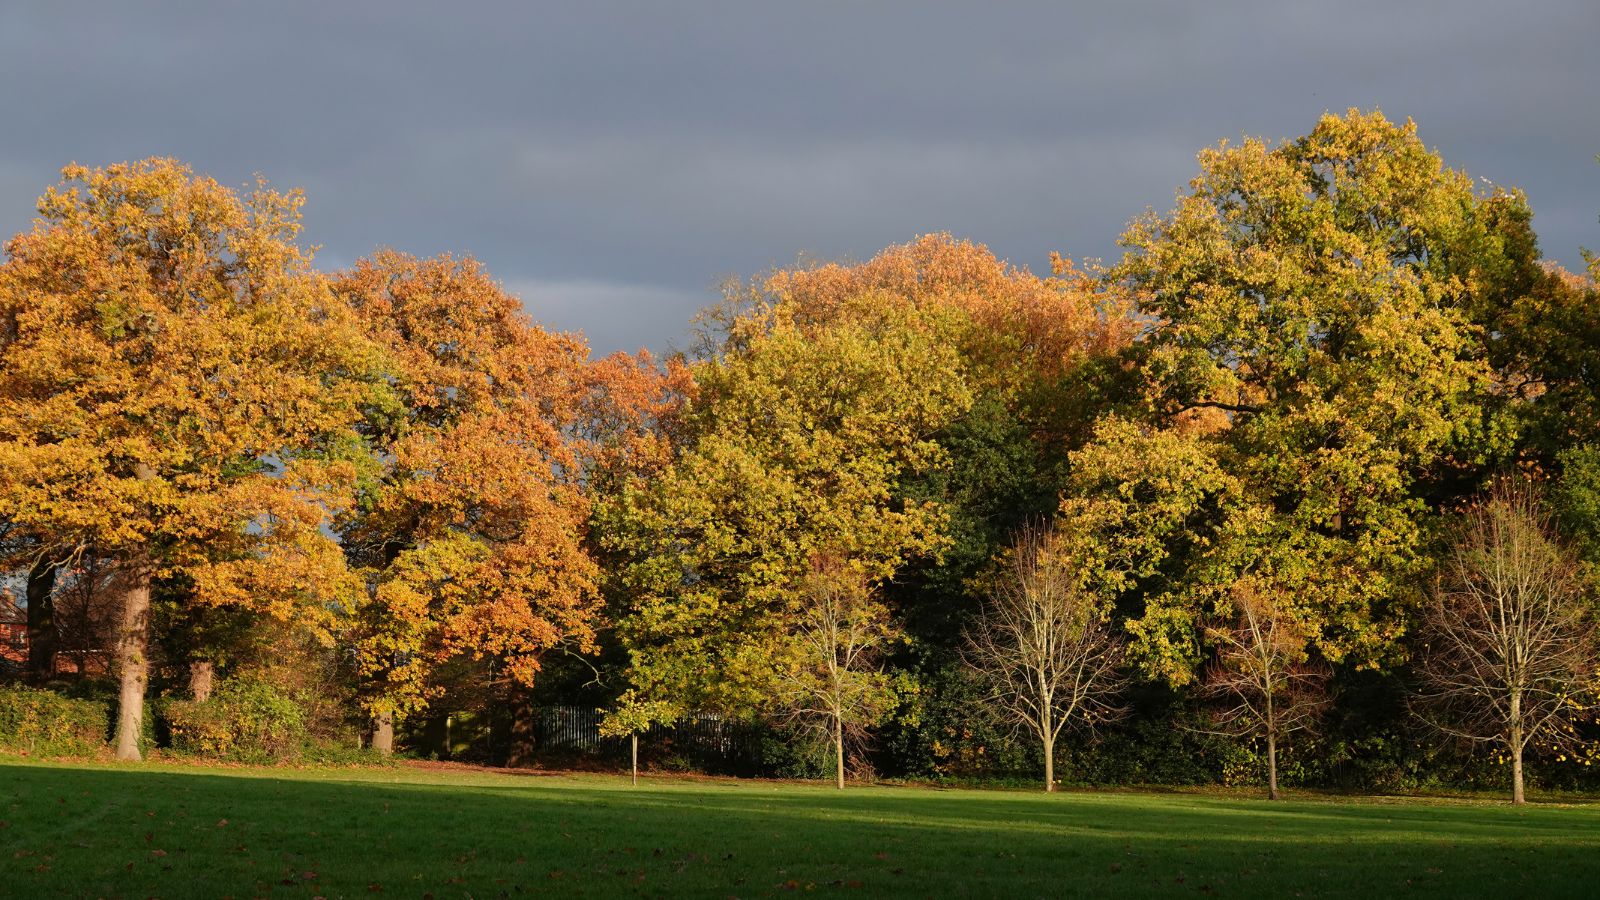 Autumn leaves on trees at Lake Meadows Park, Billericay.